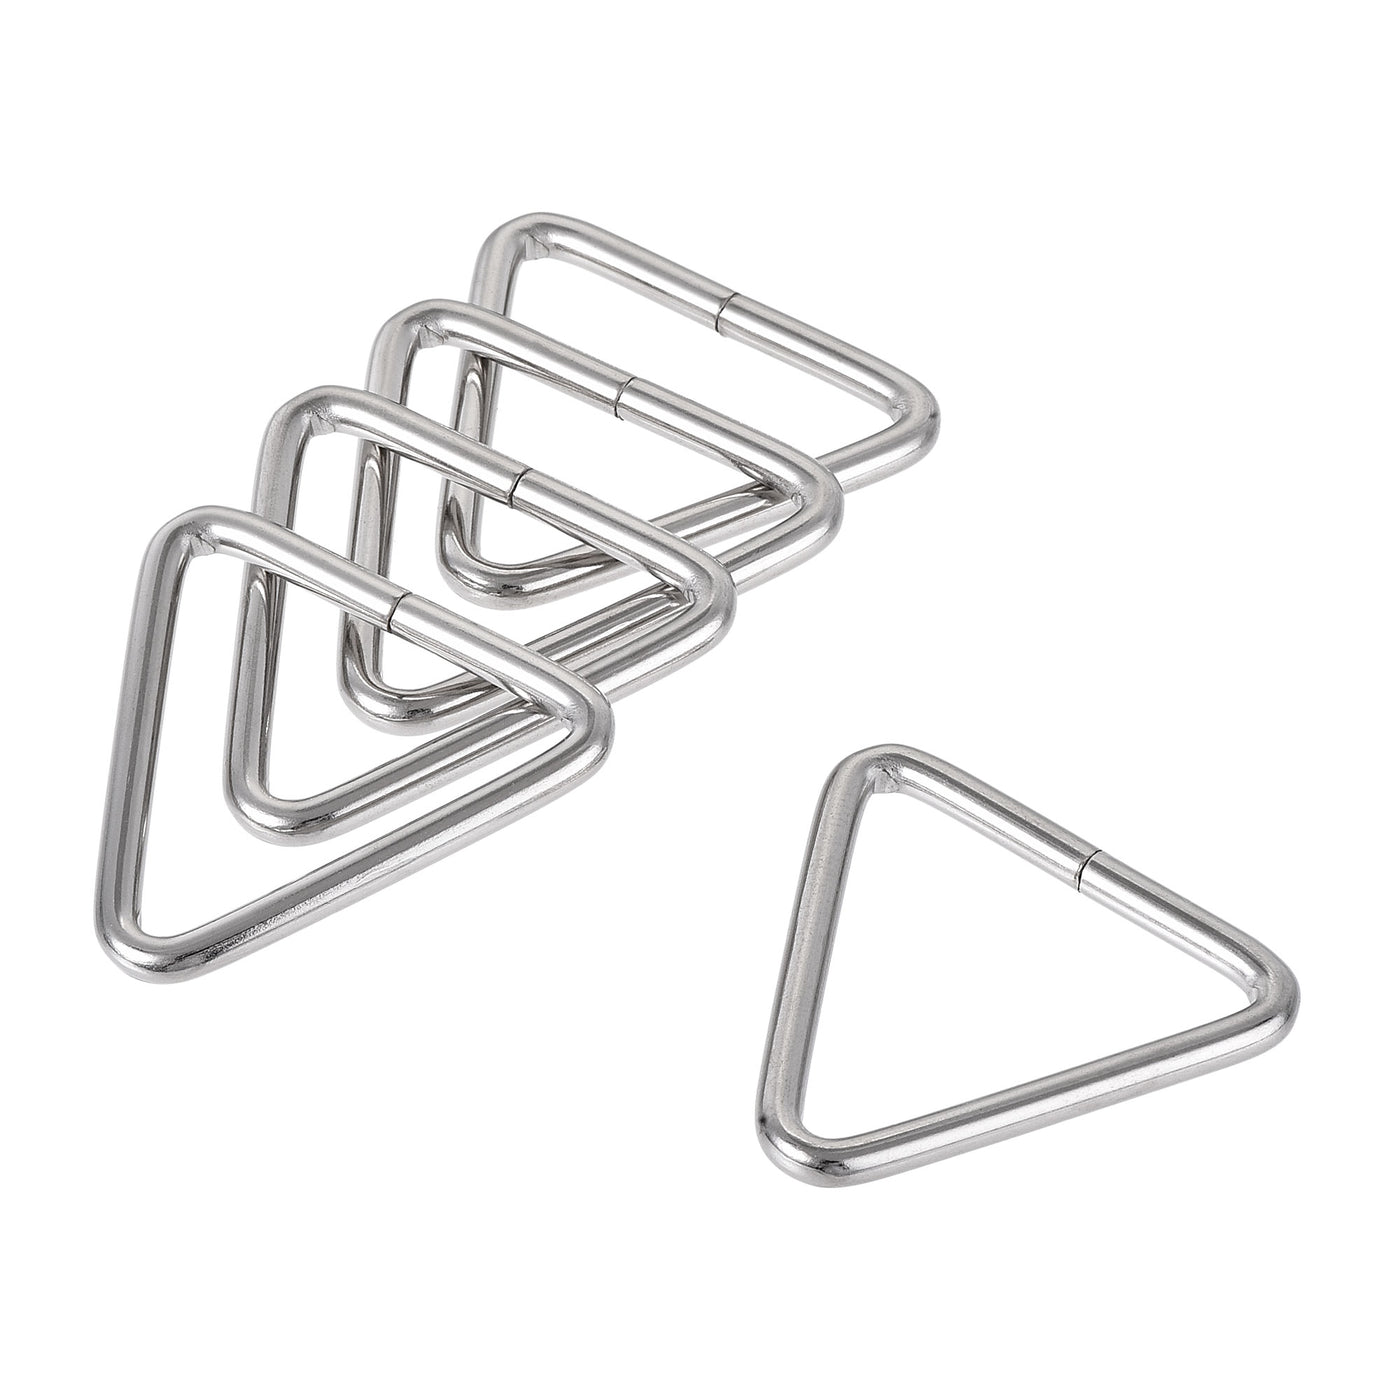 Uxcell Uxcell Metal Triangle Ring Buckle 1.5"(38mm) Inner Width for Strap Craft DIY 6pcs